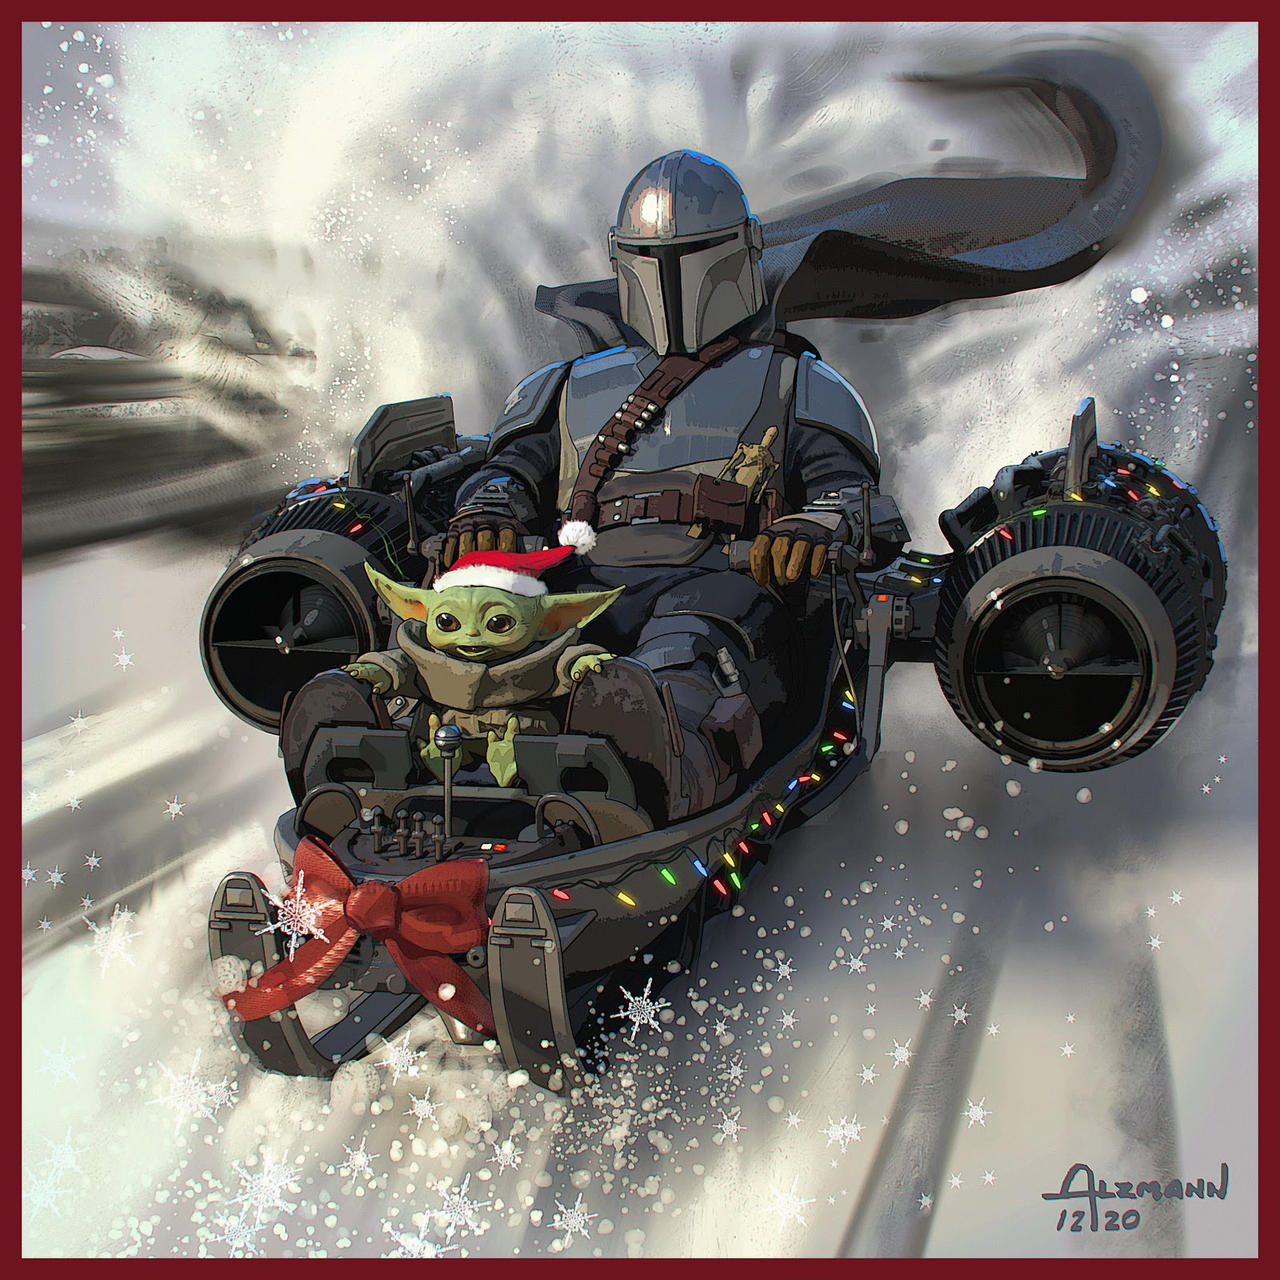 Merry Christmas from Baby Yoda and the Mandalorian